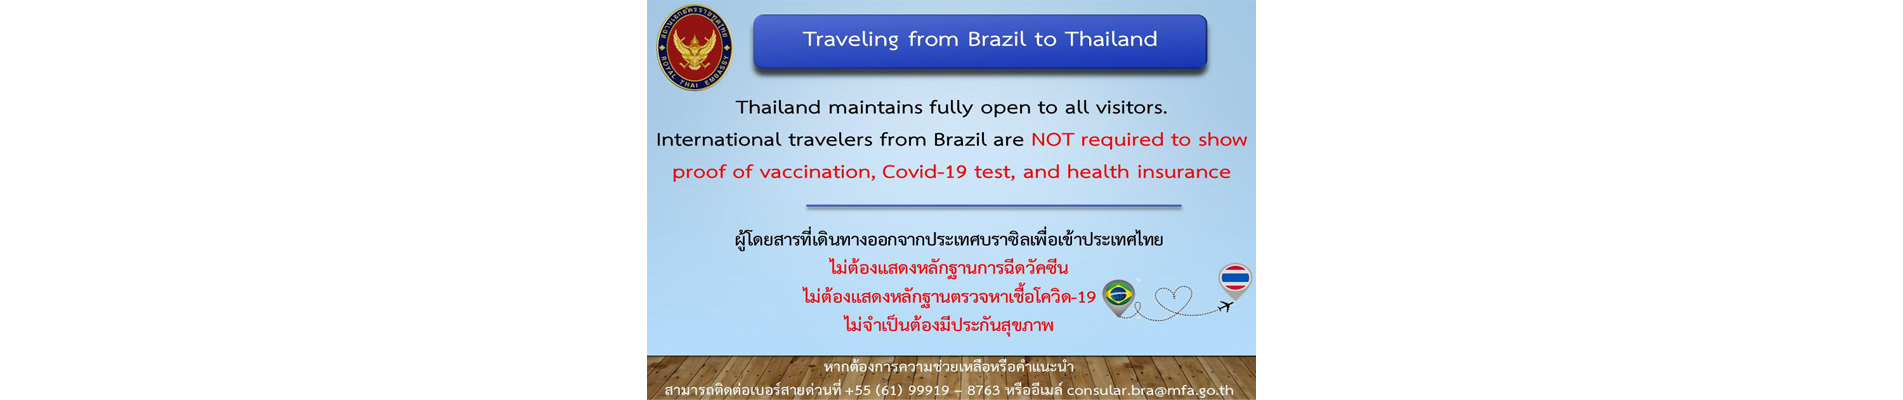 Traviling from Brazil  to Thailand